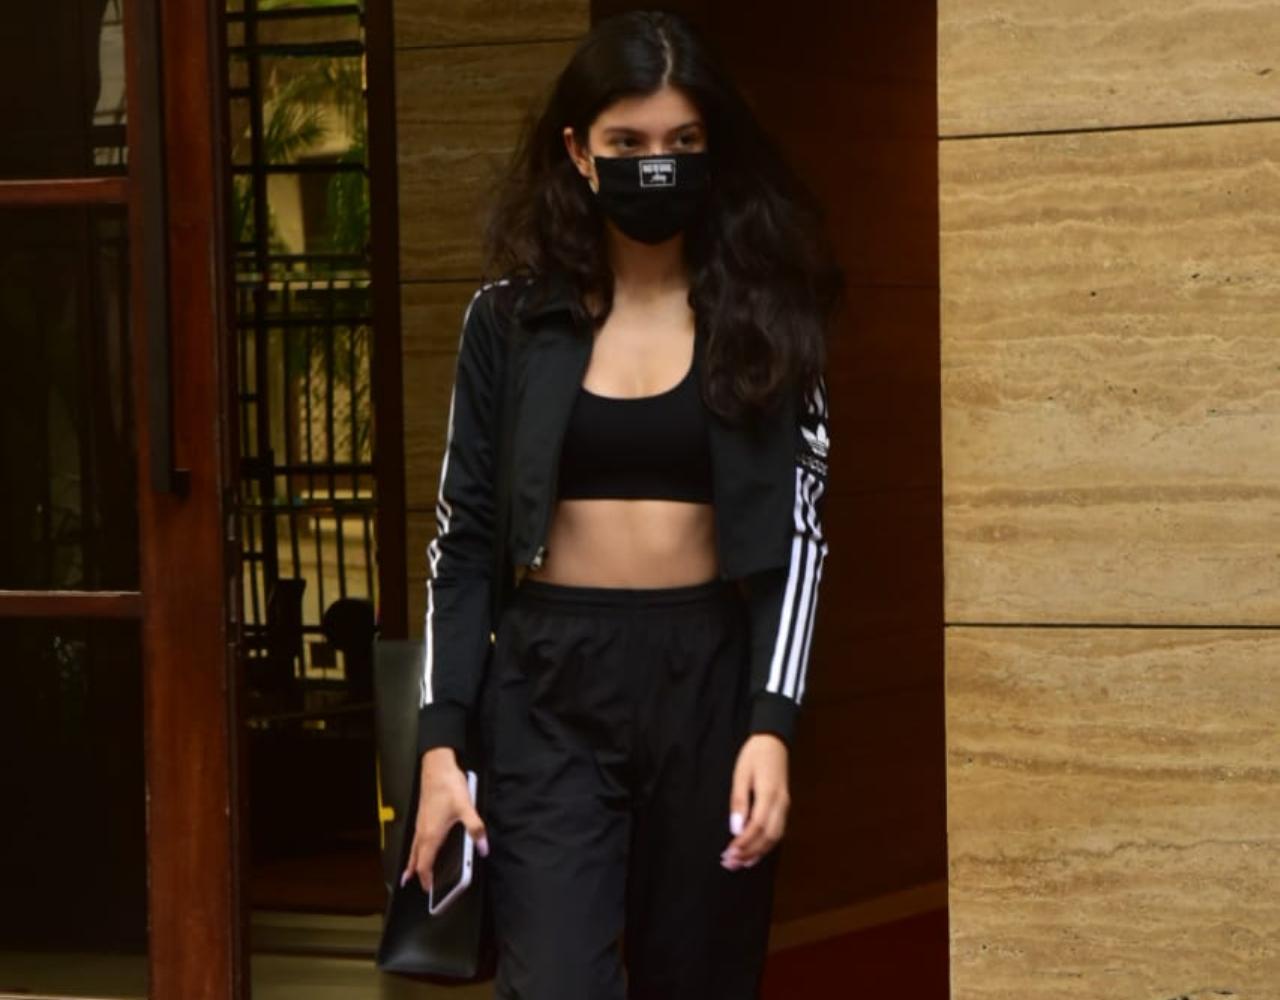 Late Sridevi's daughter Shanaya Kapoor looked sizzling in her black sports bra, jacket, and trousers as she was snapped at her dance classes in Bandra. She wore a black mask to prevent the spread of COVID-19.